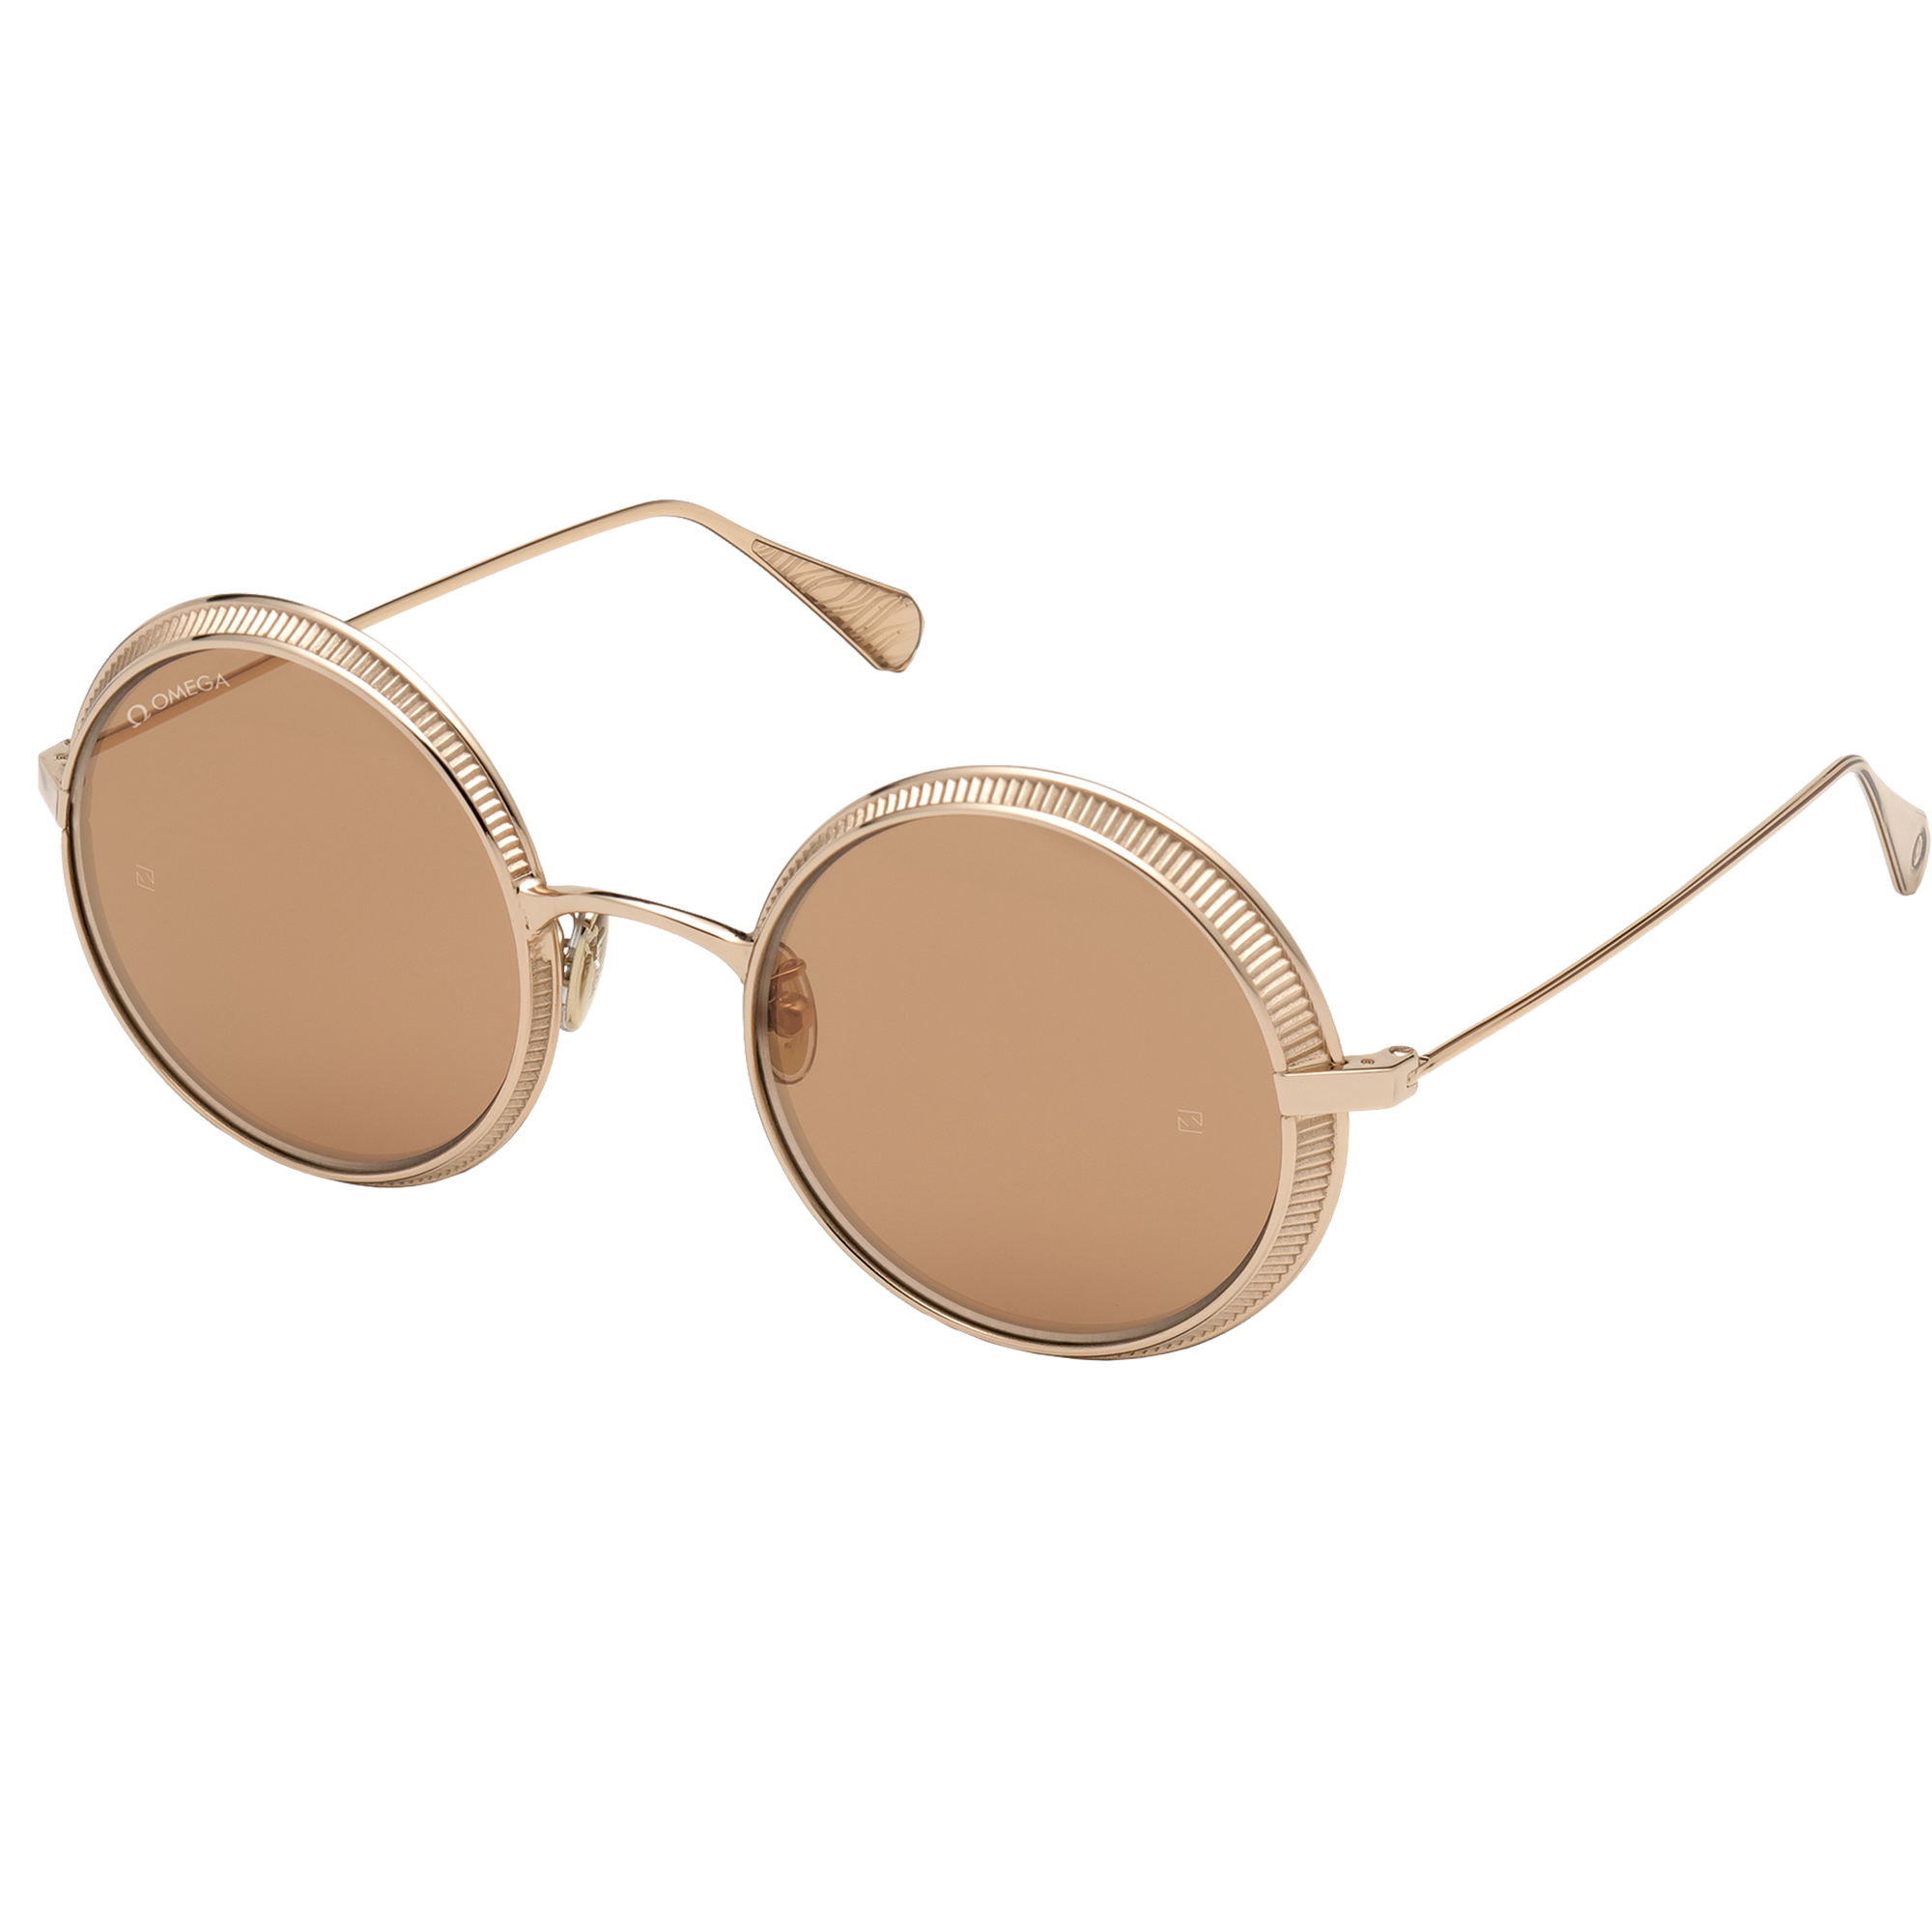 Sunglasses - Round style, Woman - OM0016-H5333G